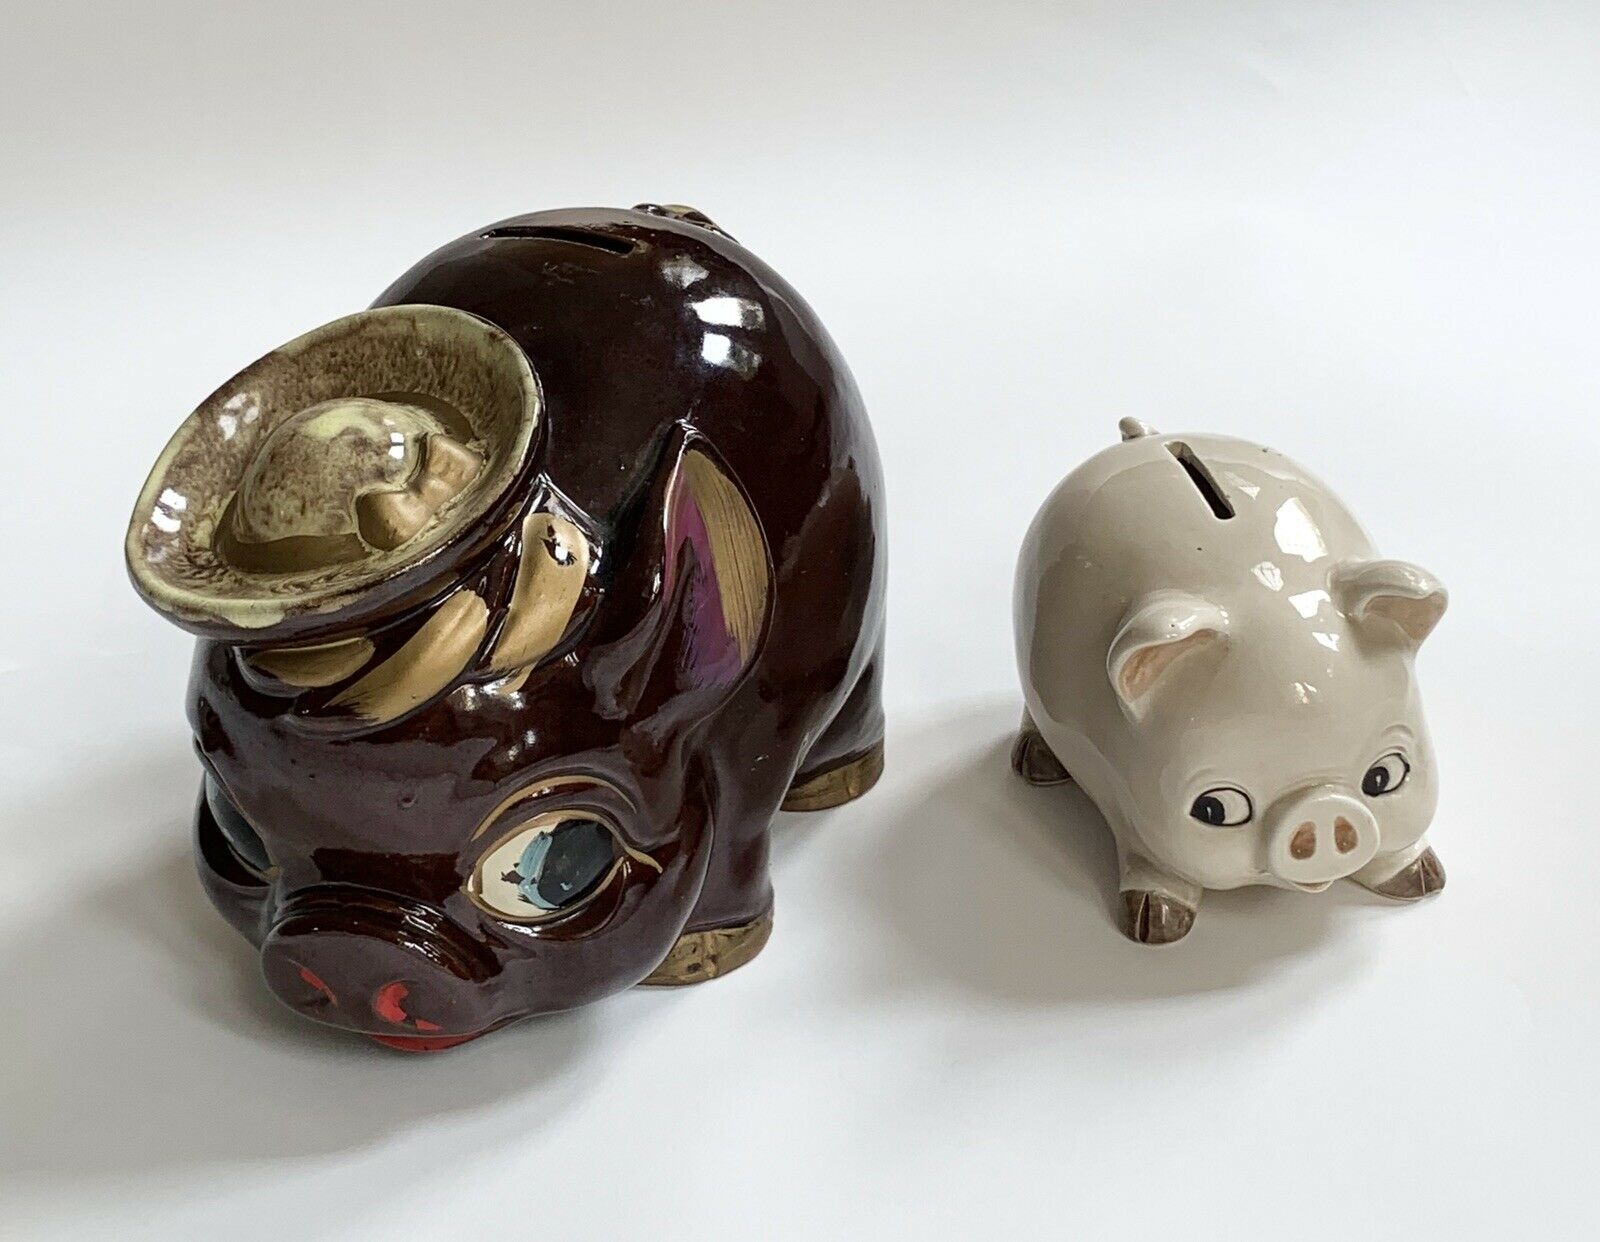 Vintage Mid Century Ceramic Piggy Bank Lot of 2 Made in Japan OMC Brown White